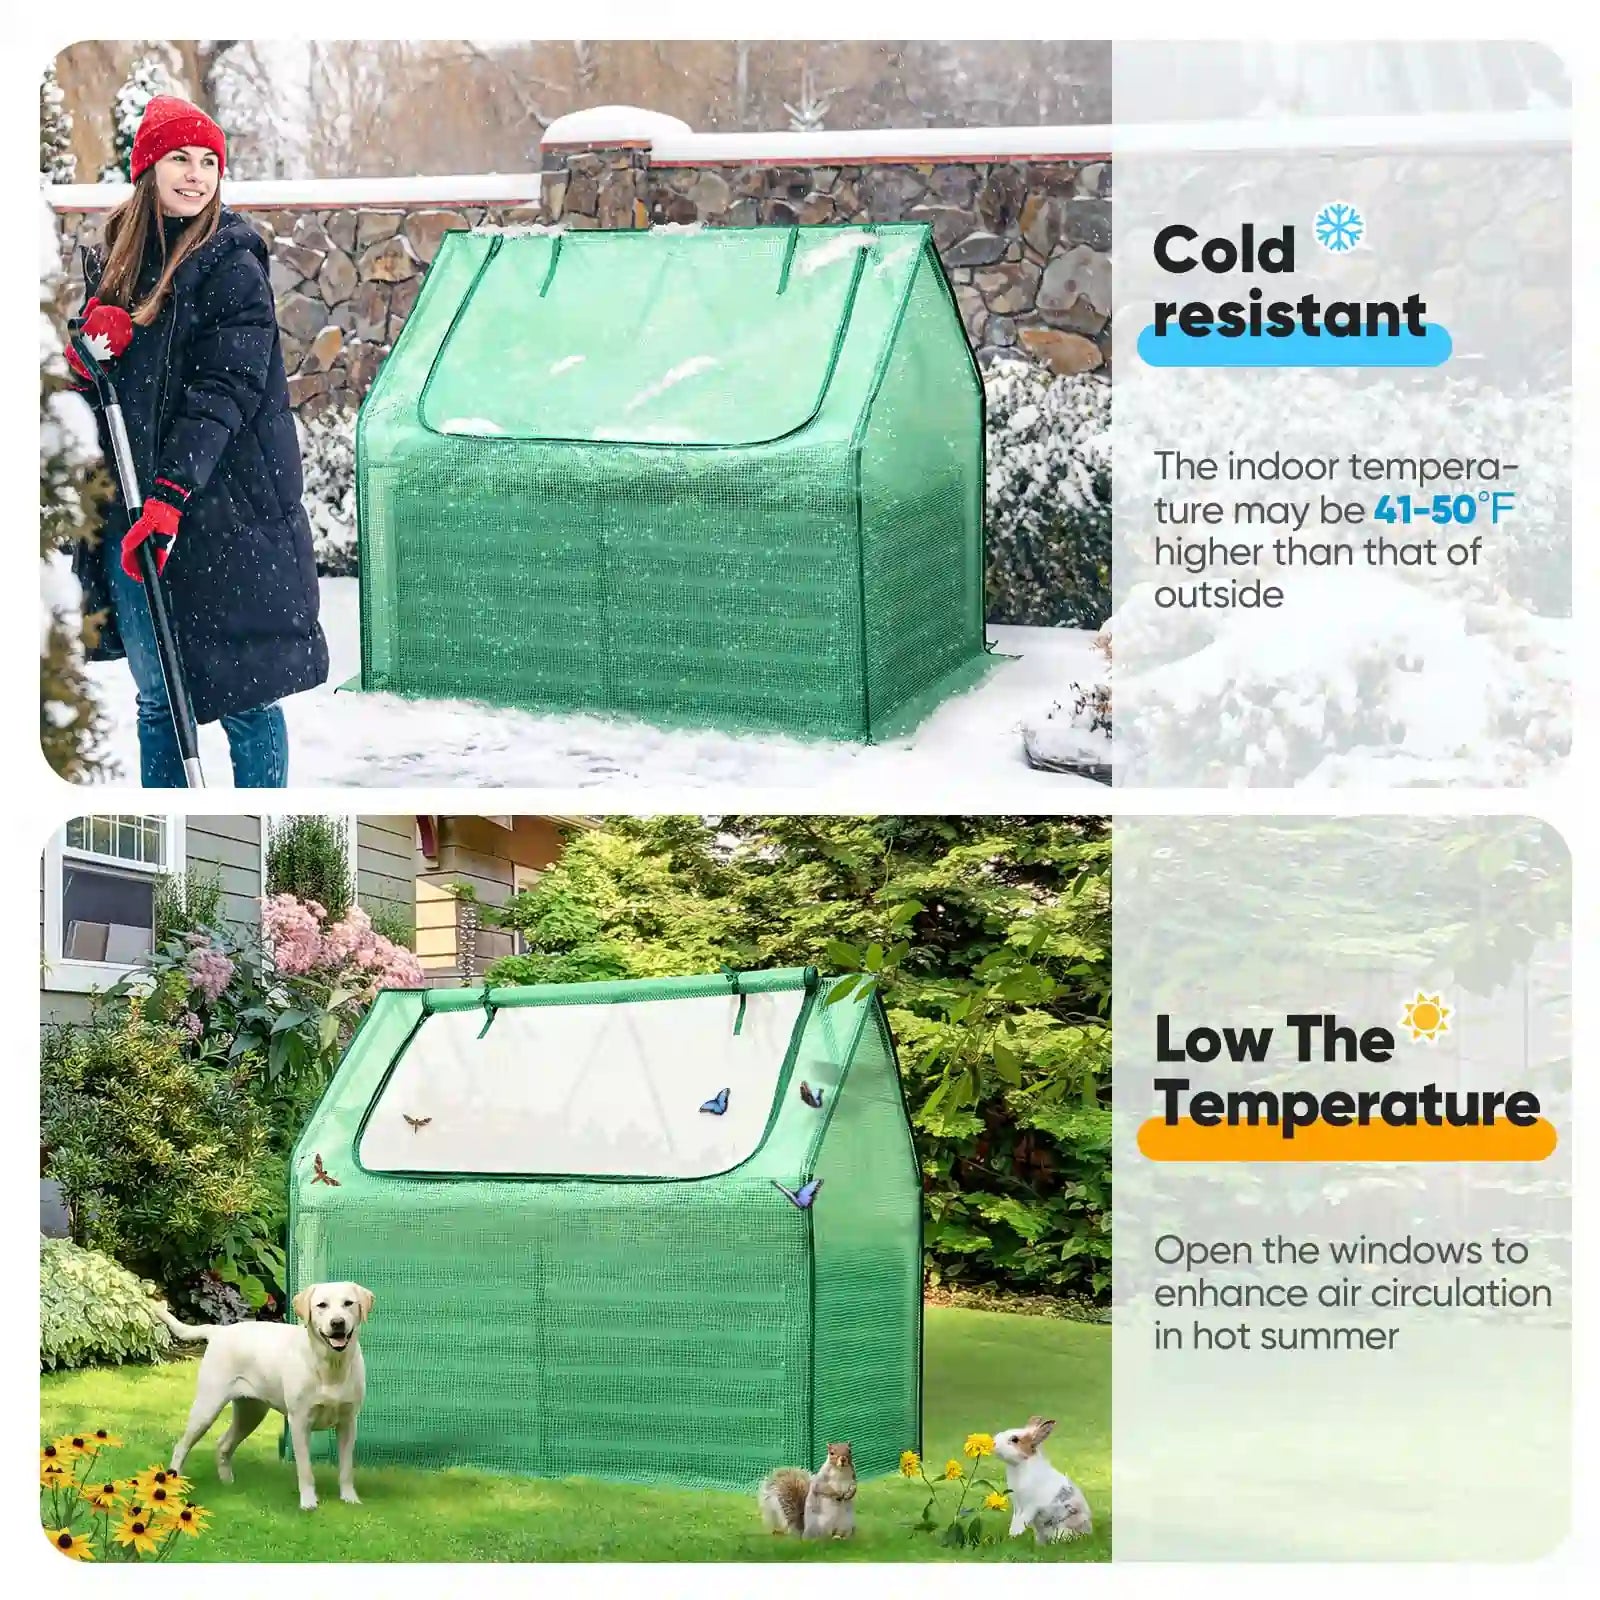 Cold resistant#color_green